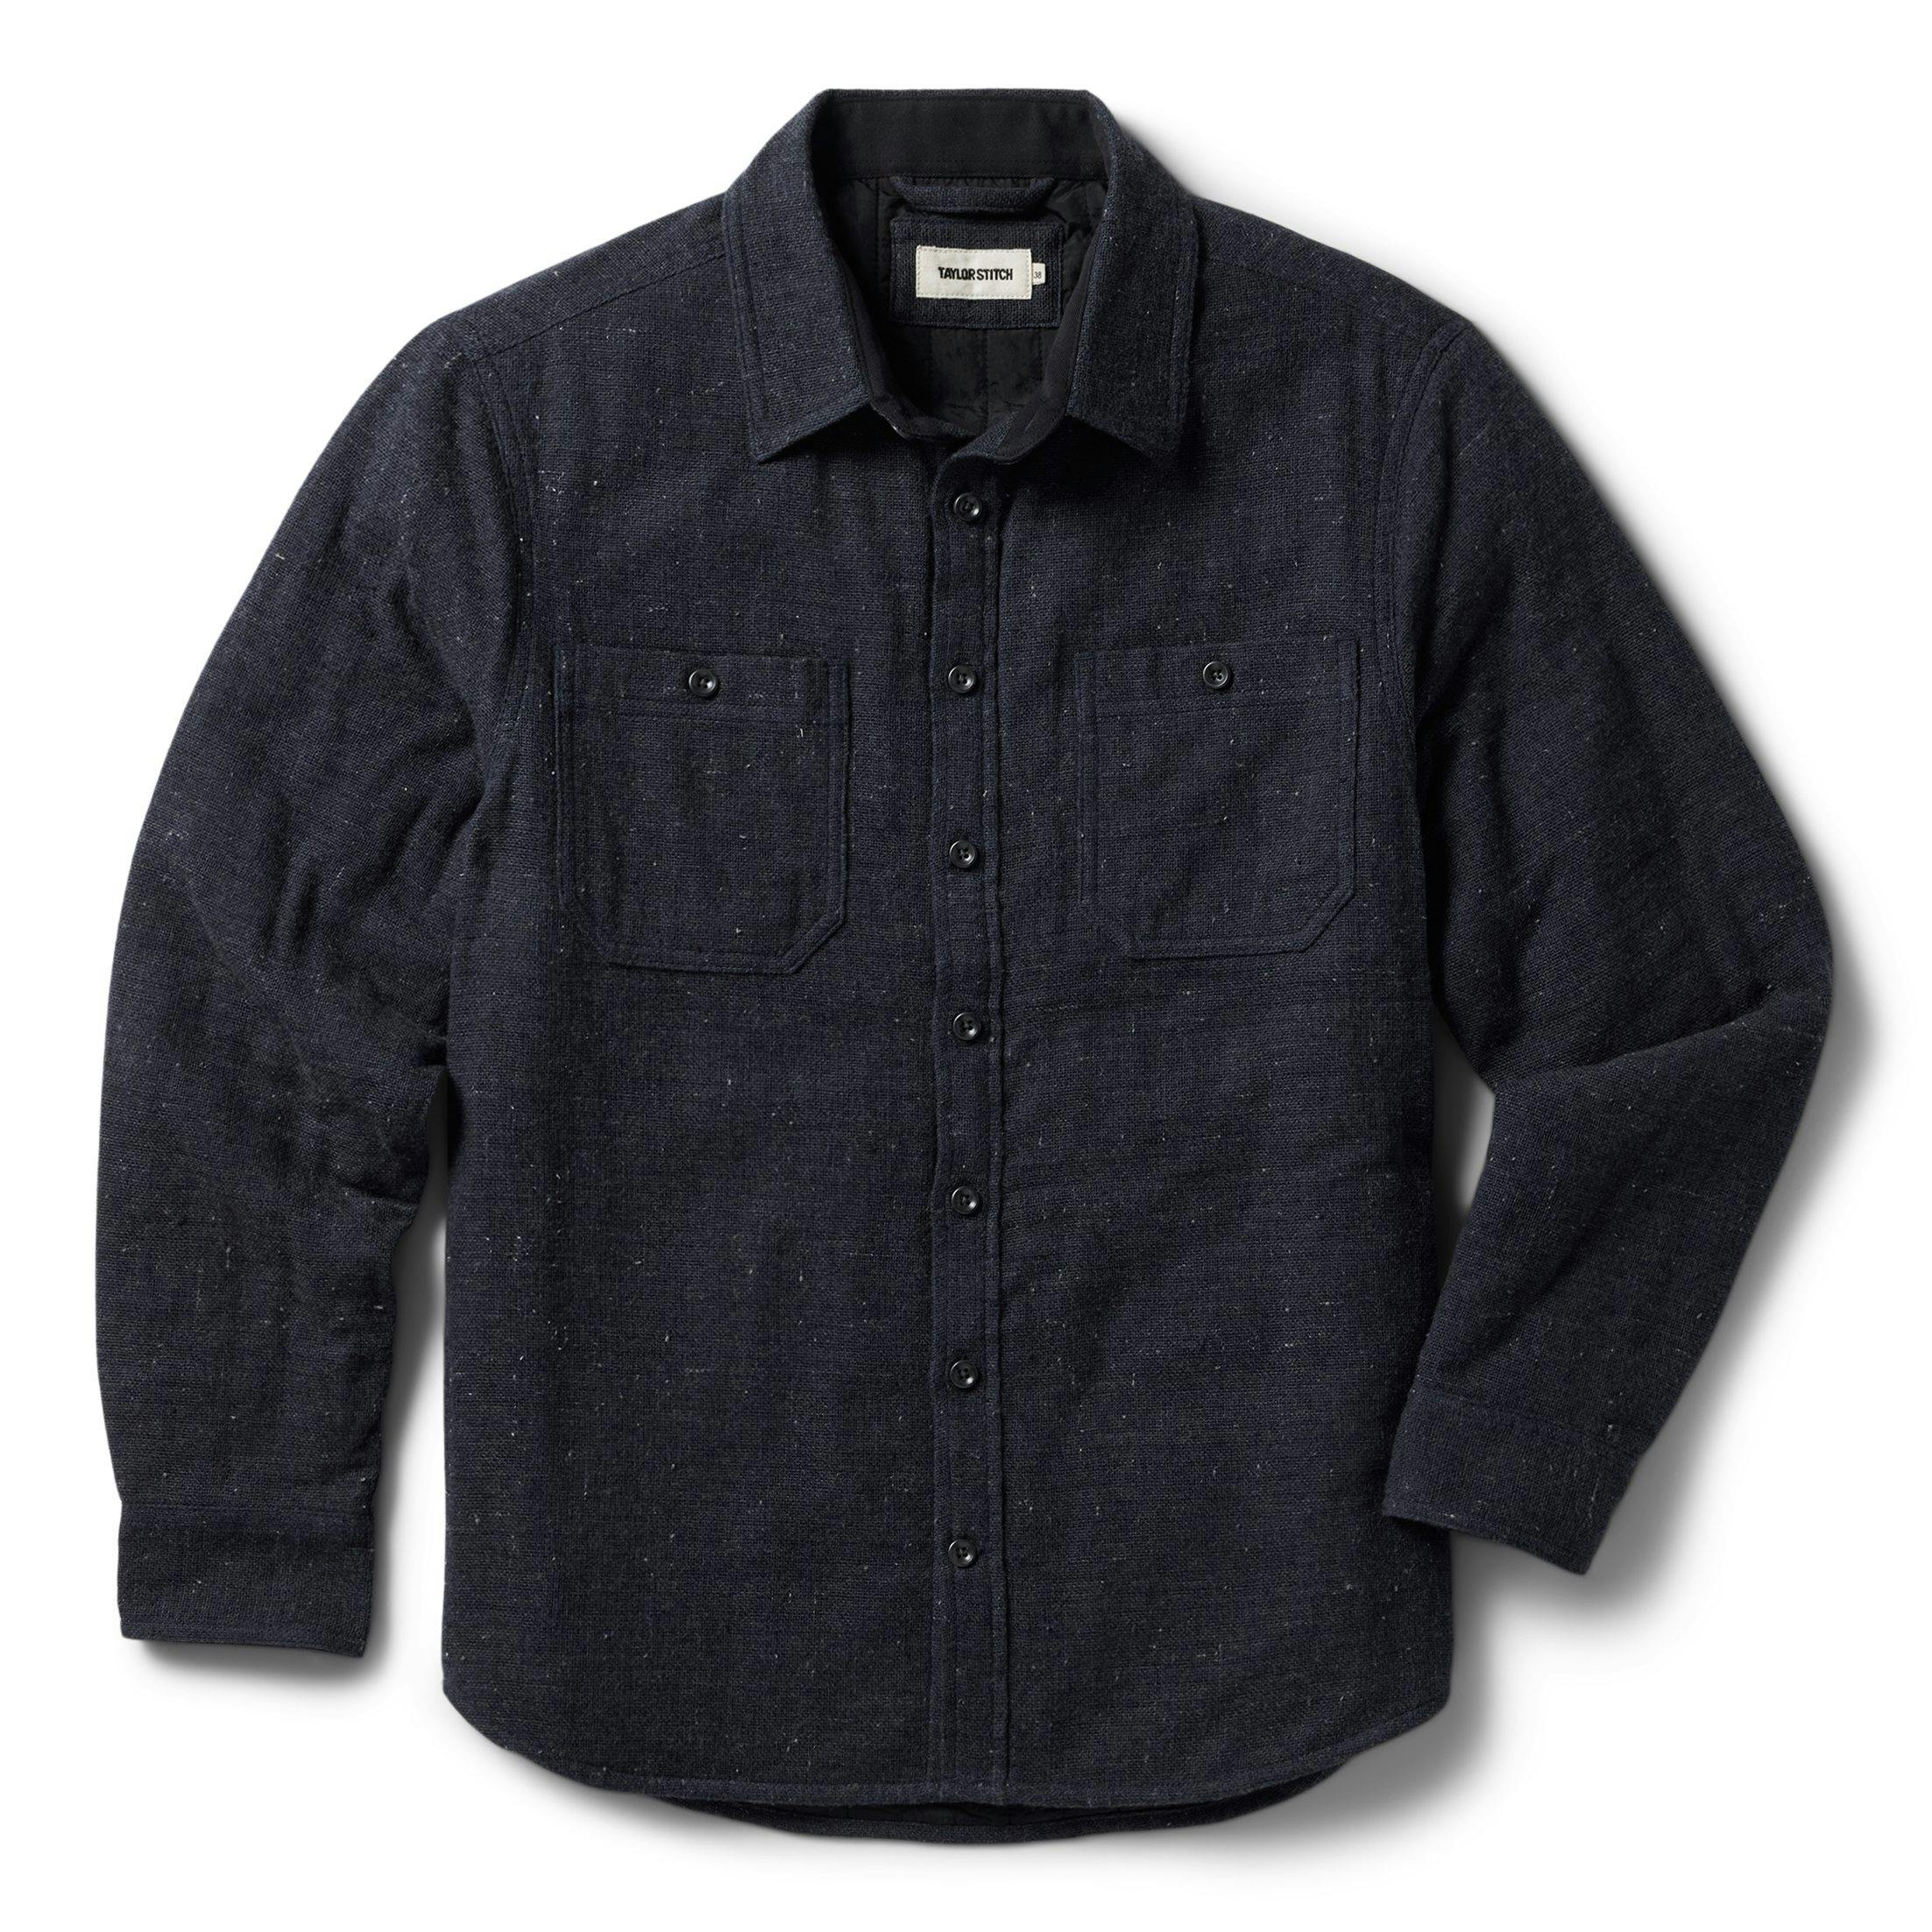 The Lined Utility Shirt